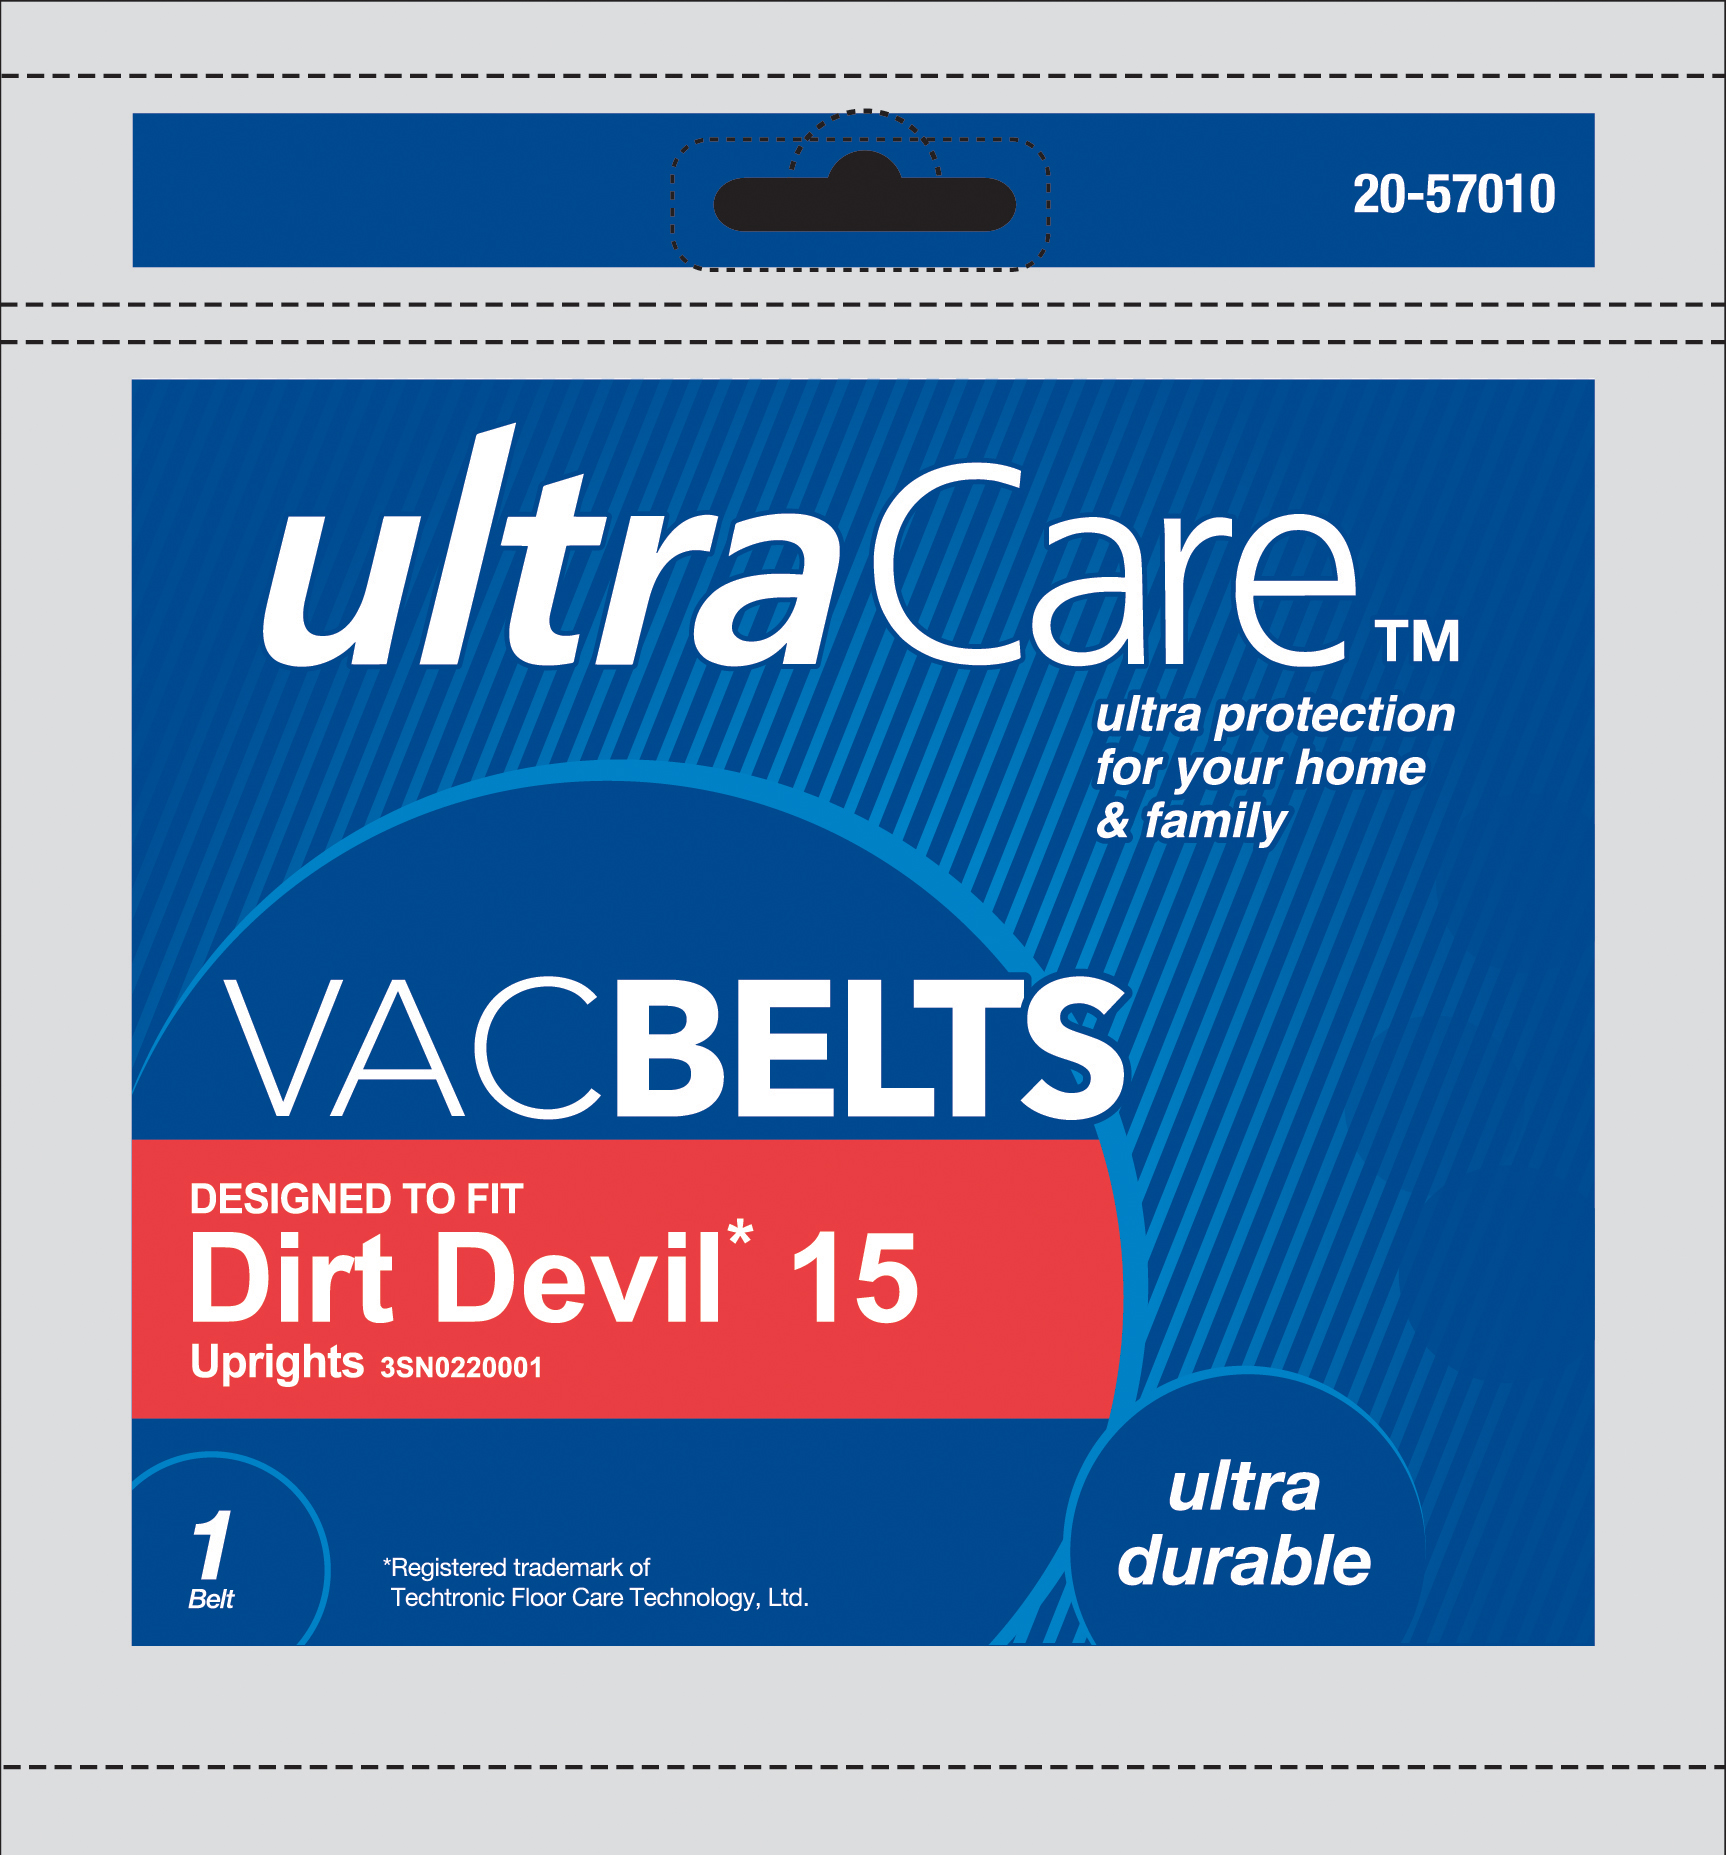 UltraCare UCB5015-6 VacBelts for Dirt Devil 15